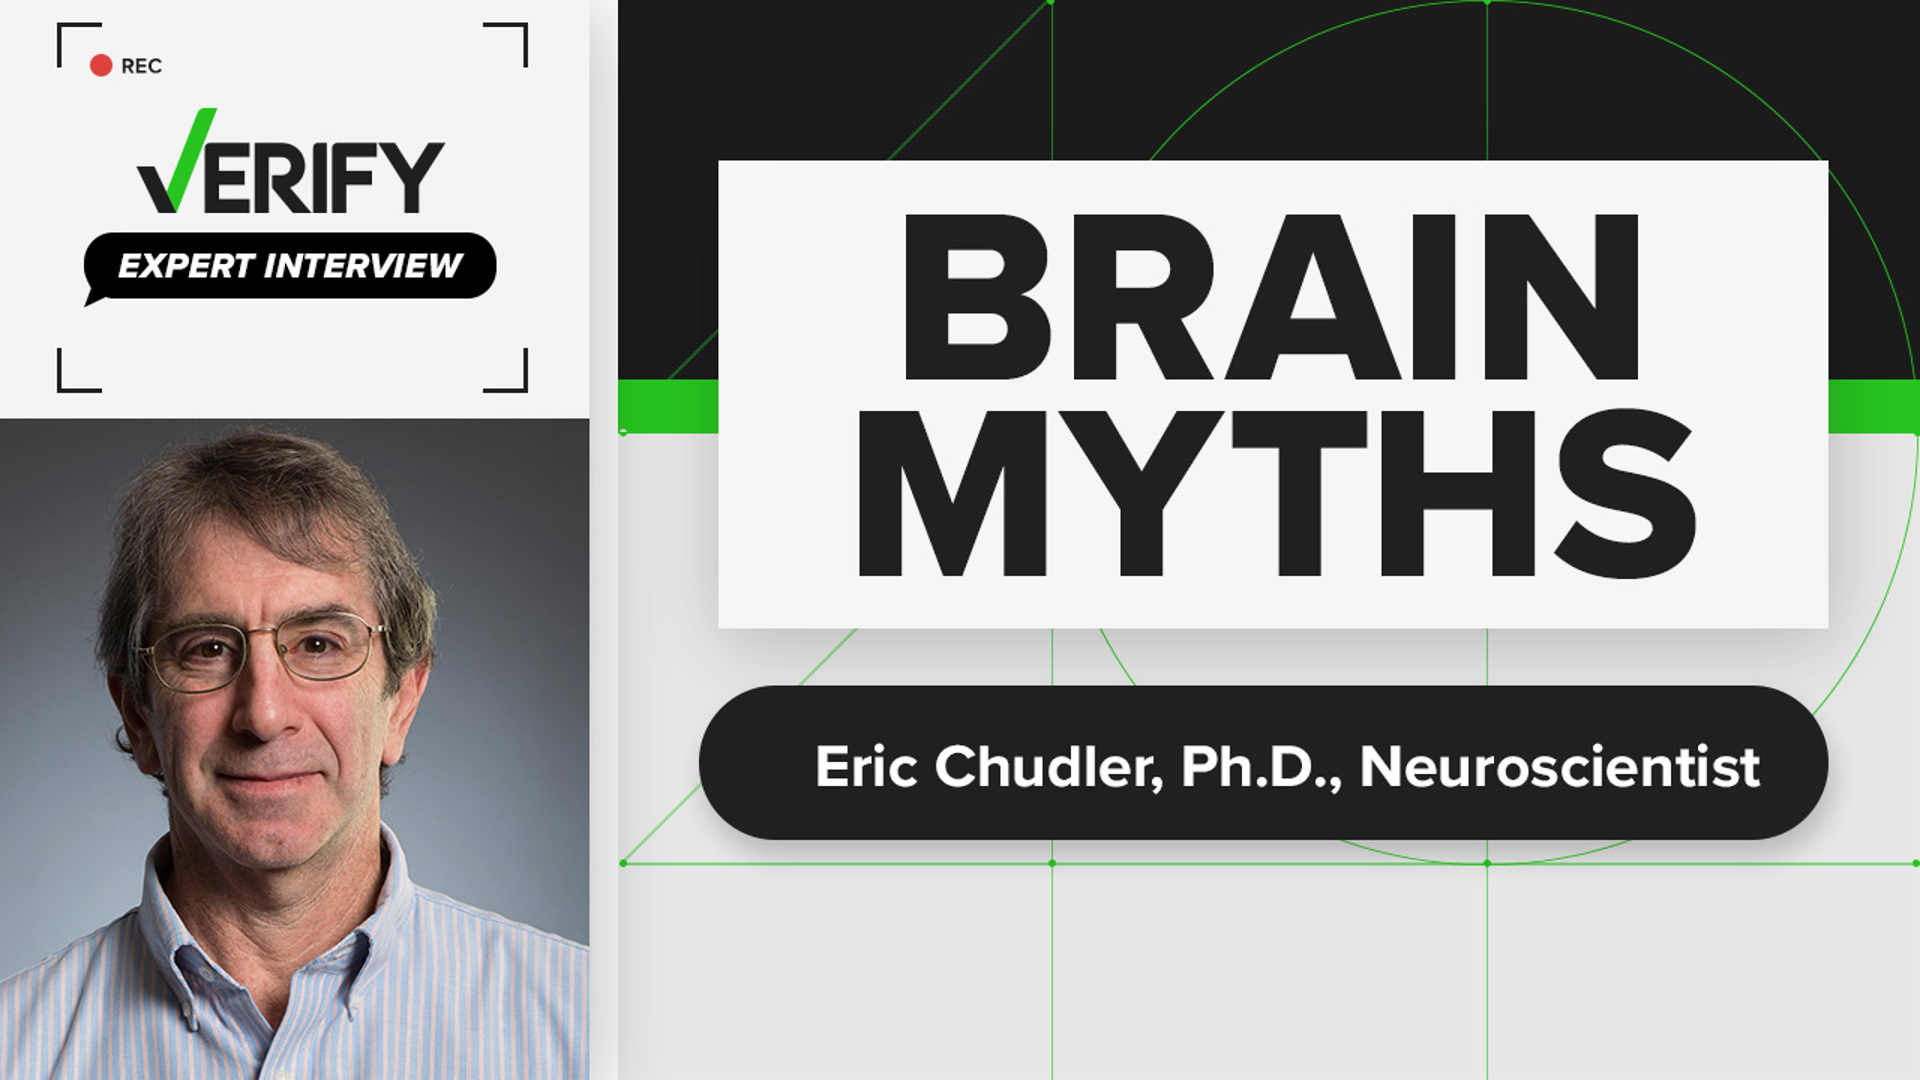 There are a lot of myths and misconceptions around our brains. Neuroscientist Eric Chudler, Ph.D. sheds light on some of them.